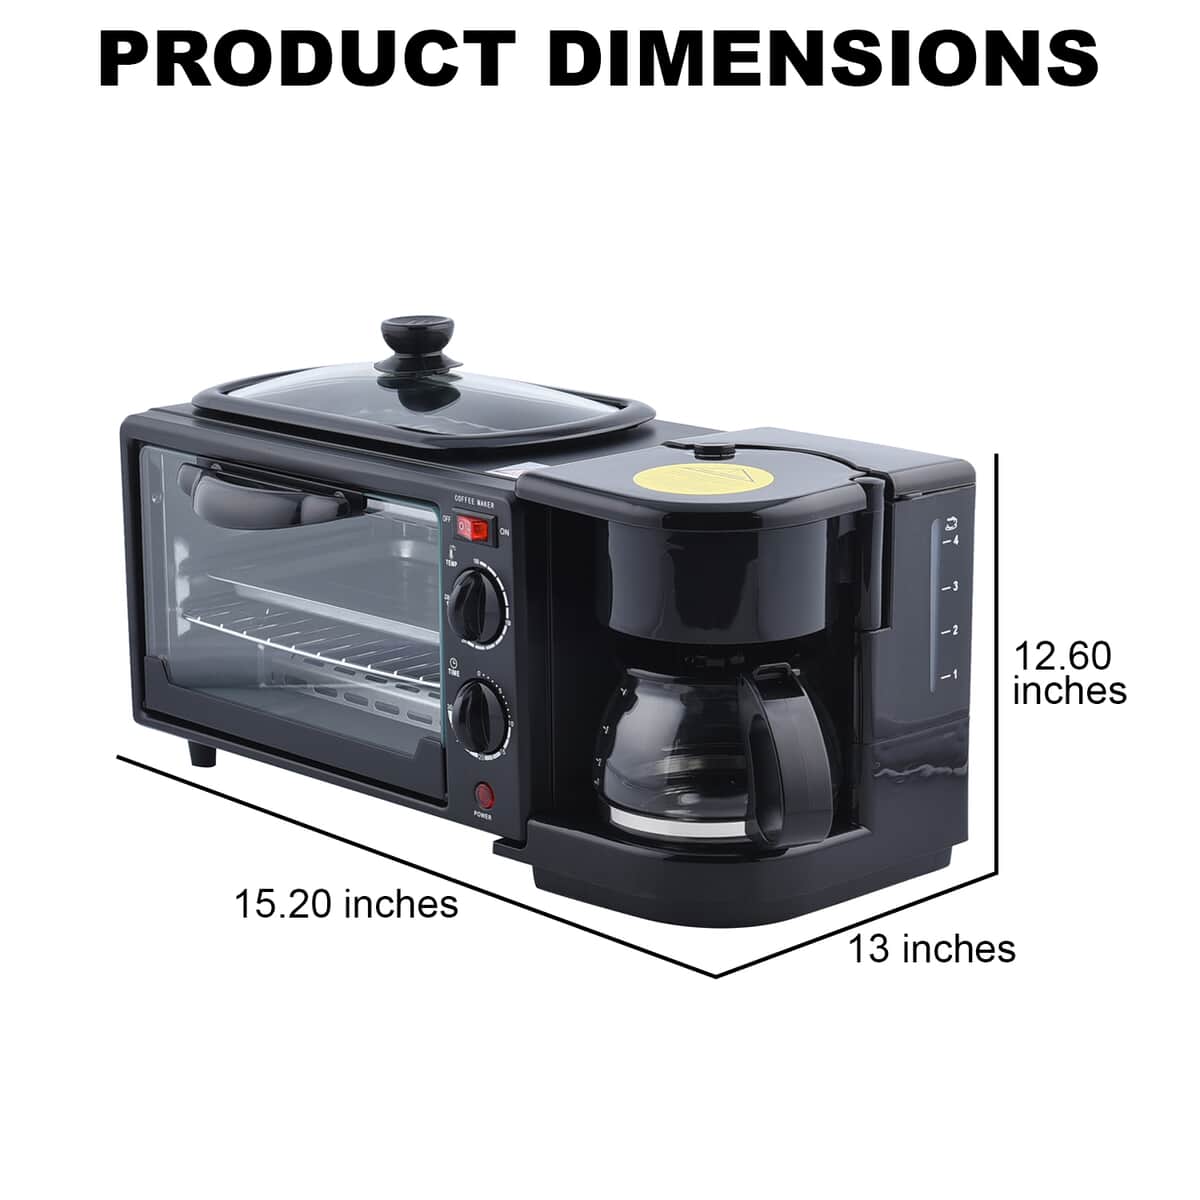 3-in-1 Complete Breakfast Machine Combination - Oven, Frying Pan and Coffee Maker (9 Liters) image number 3